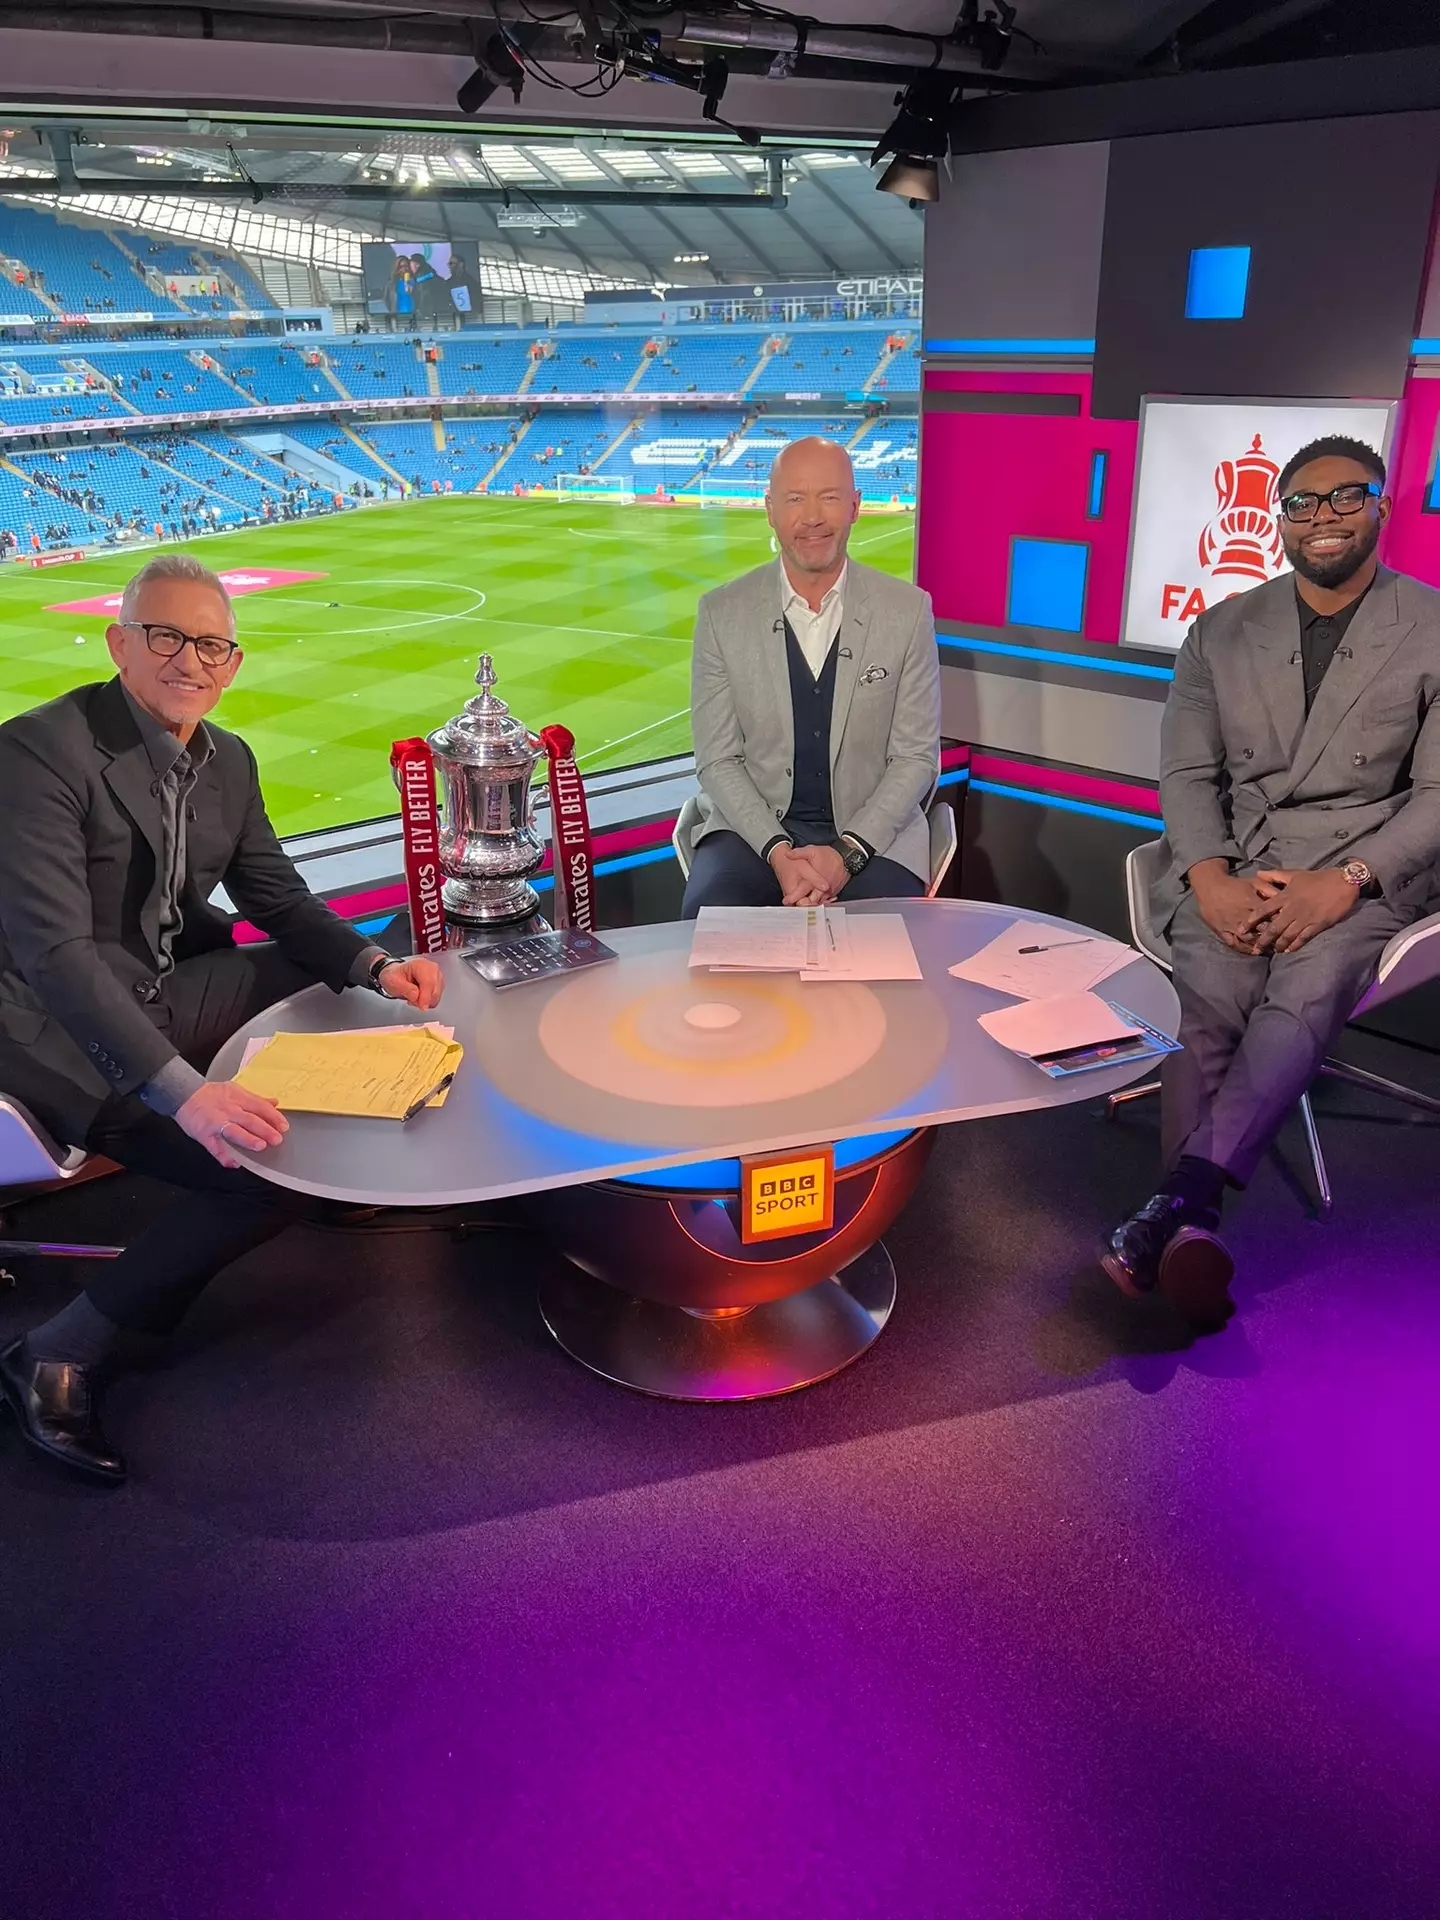 Lineker was joined by Alan Shearer and Micah Richards this evening.